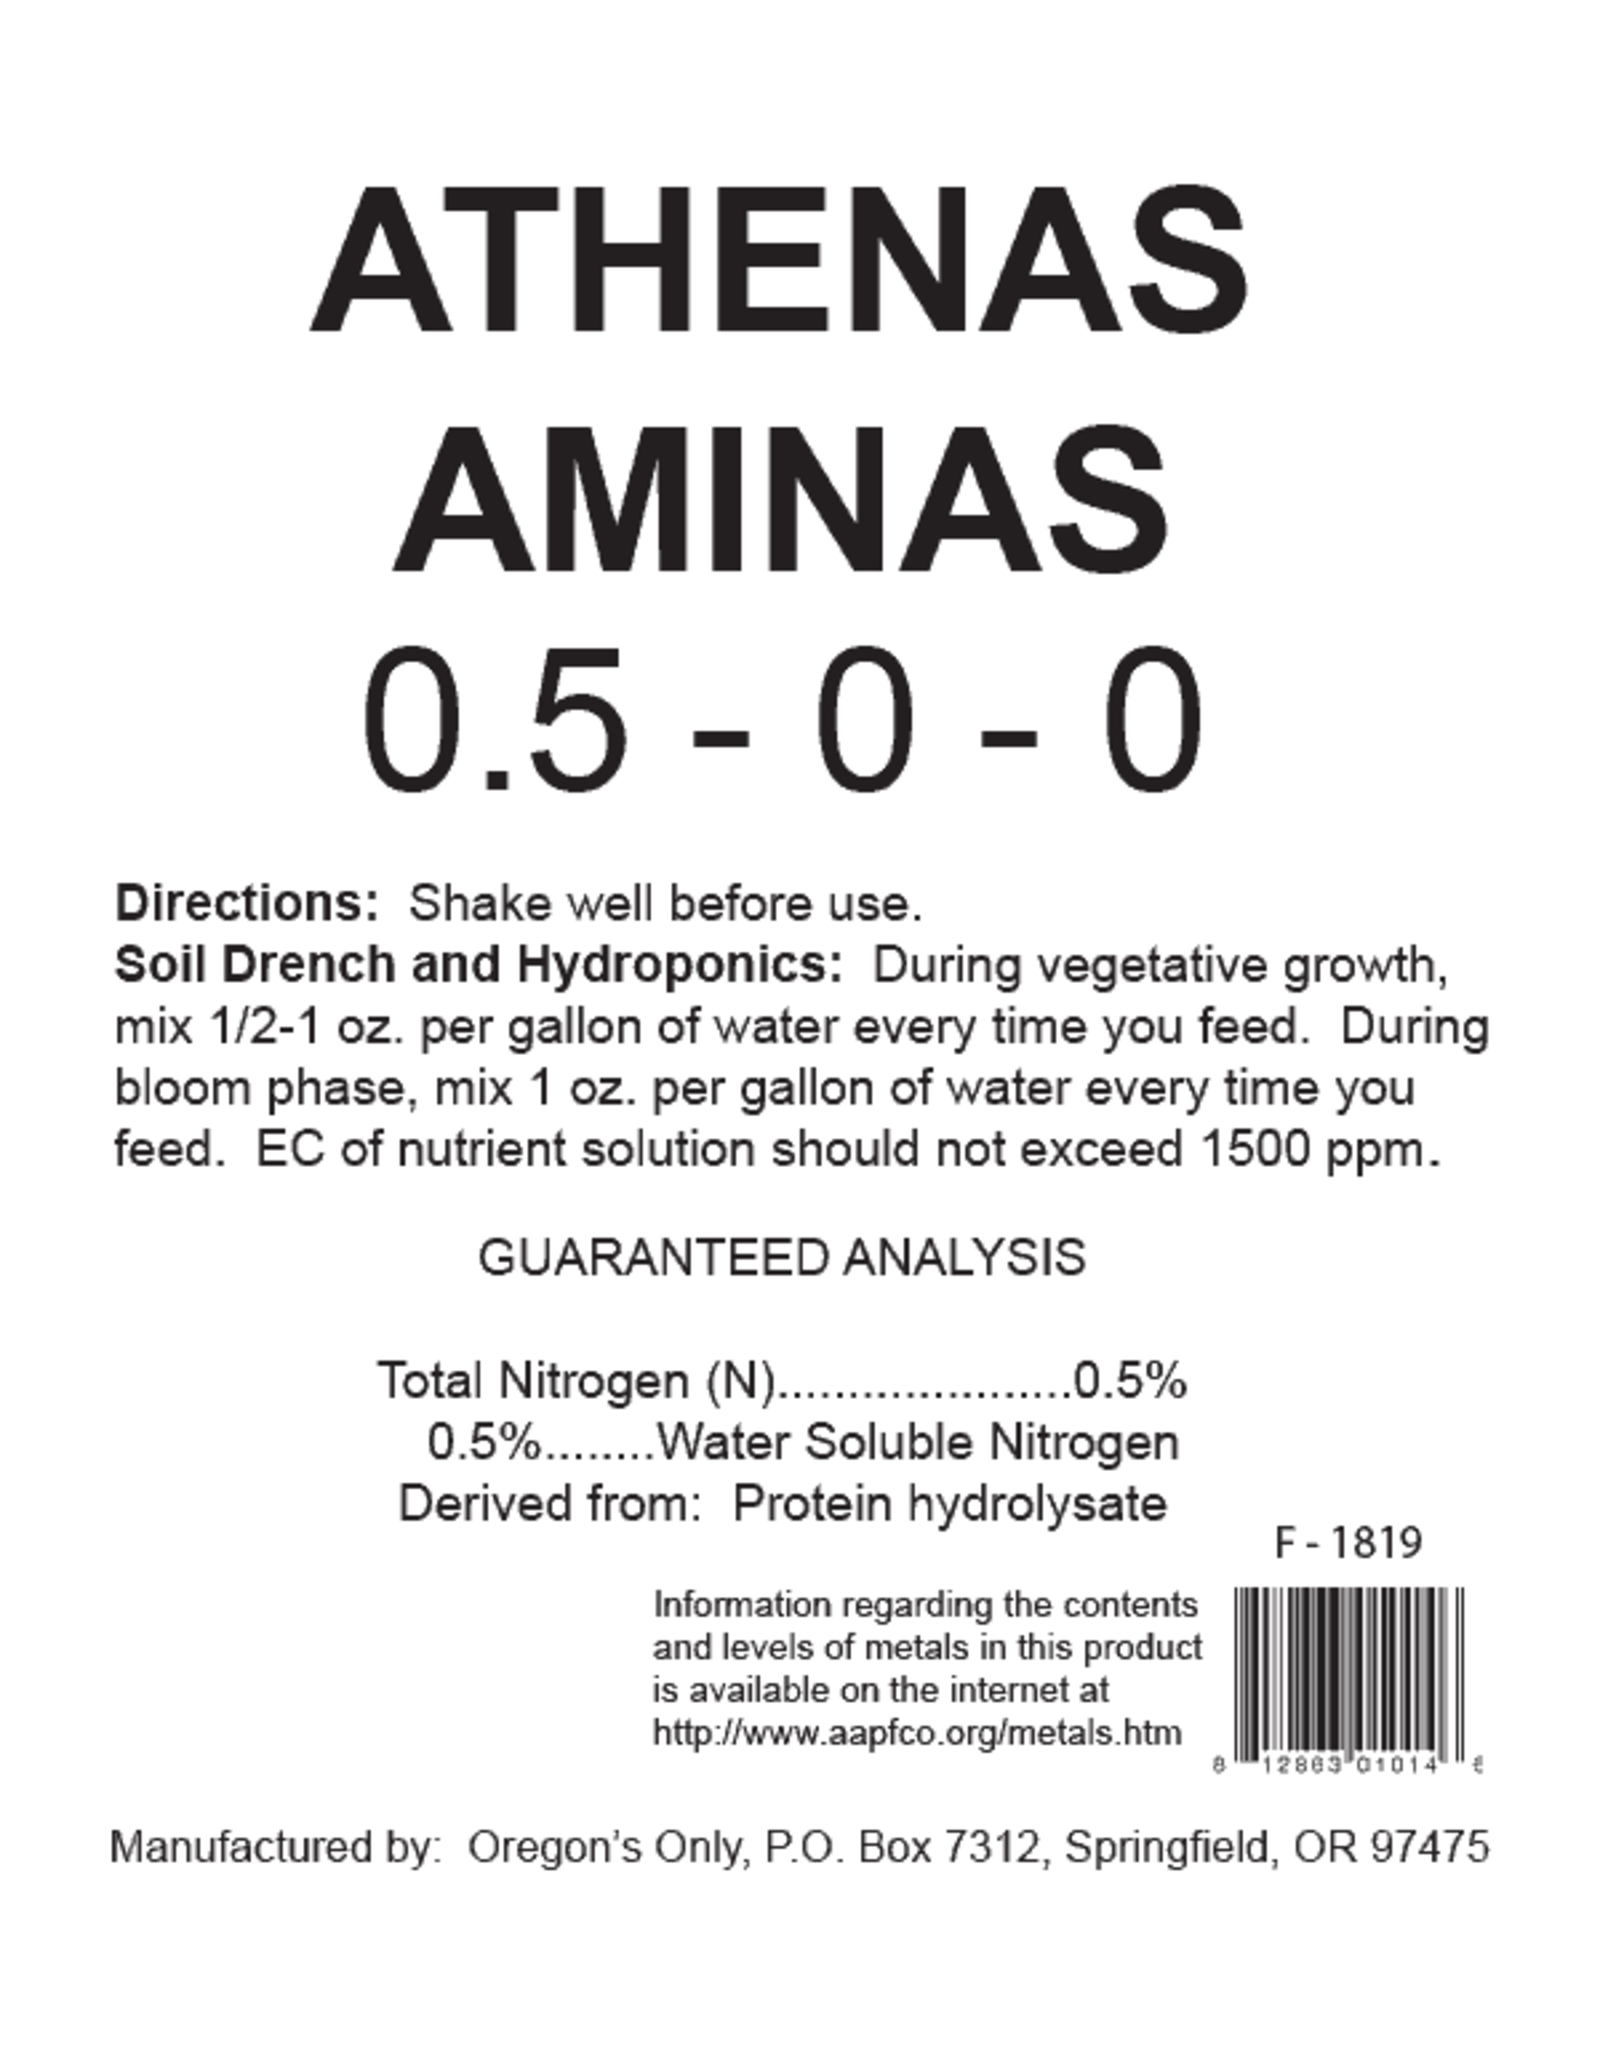 Nectar For The Gods Athena's Aminas, 2.5 gal by Nectar For The Gods